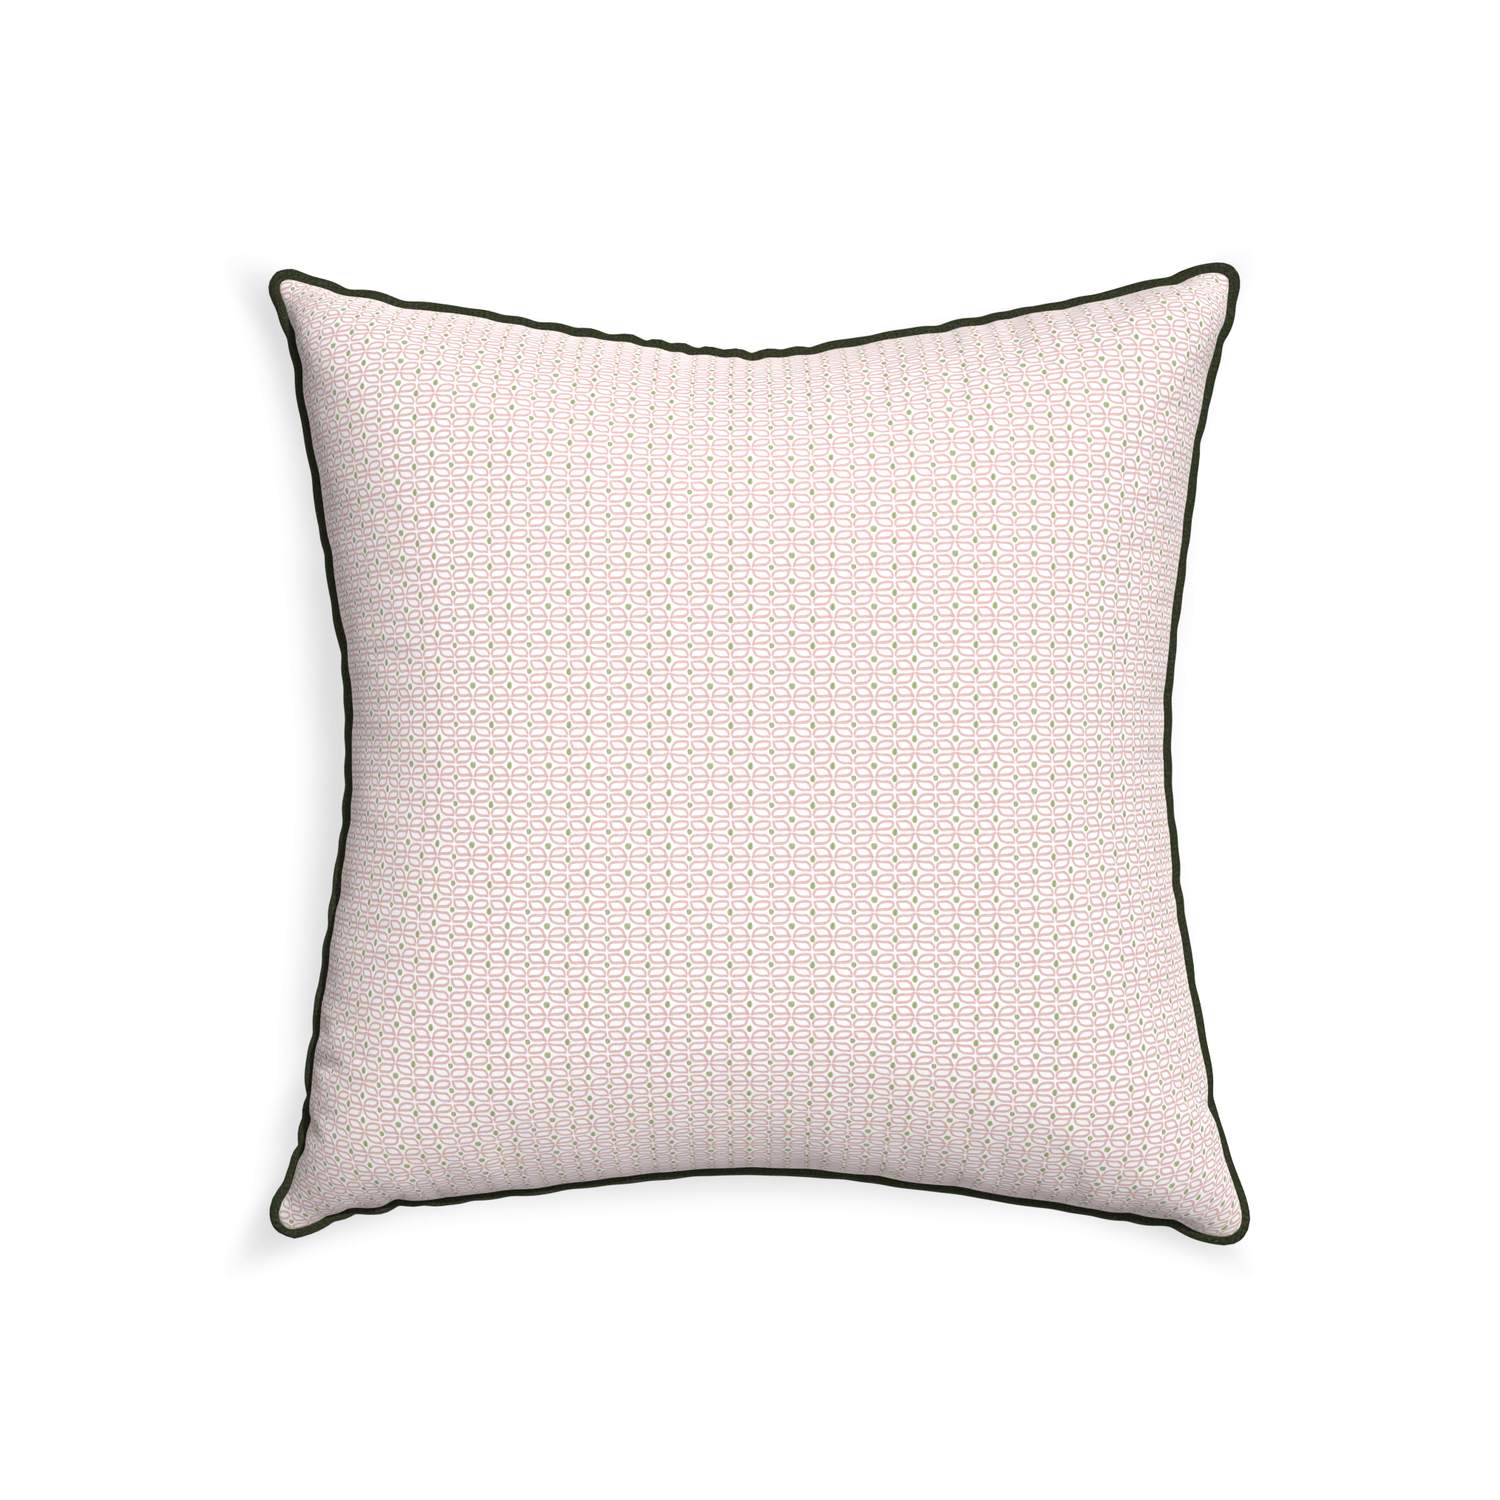 22-square loomi pink custom pink geometricpillow with f piping on white background